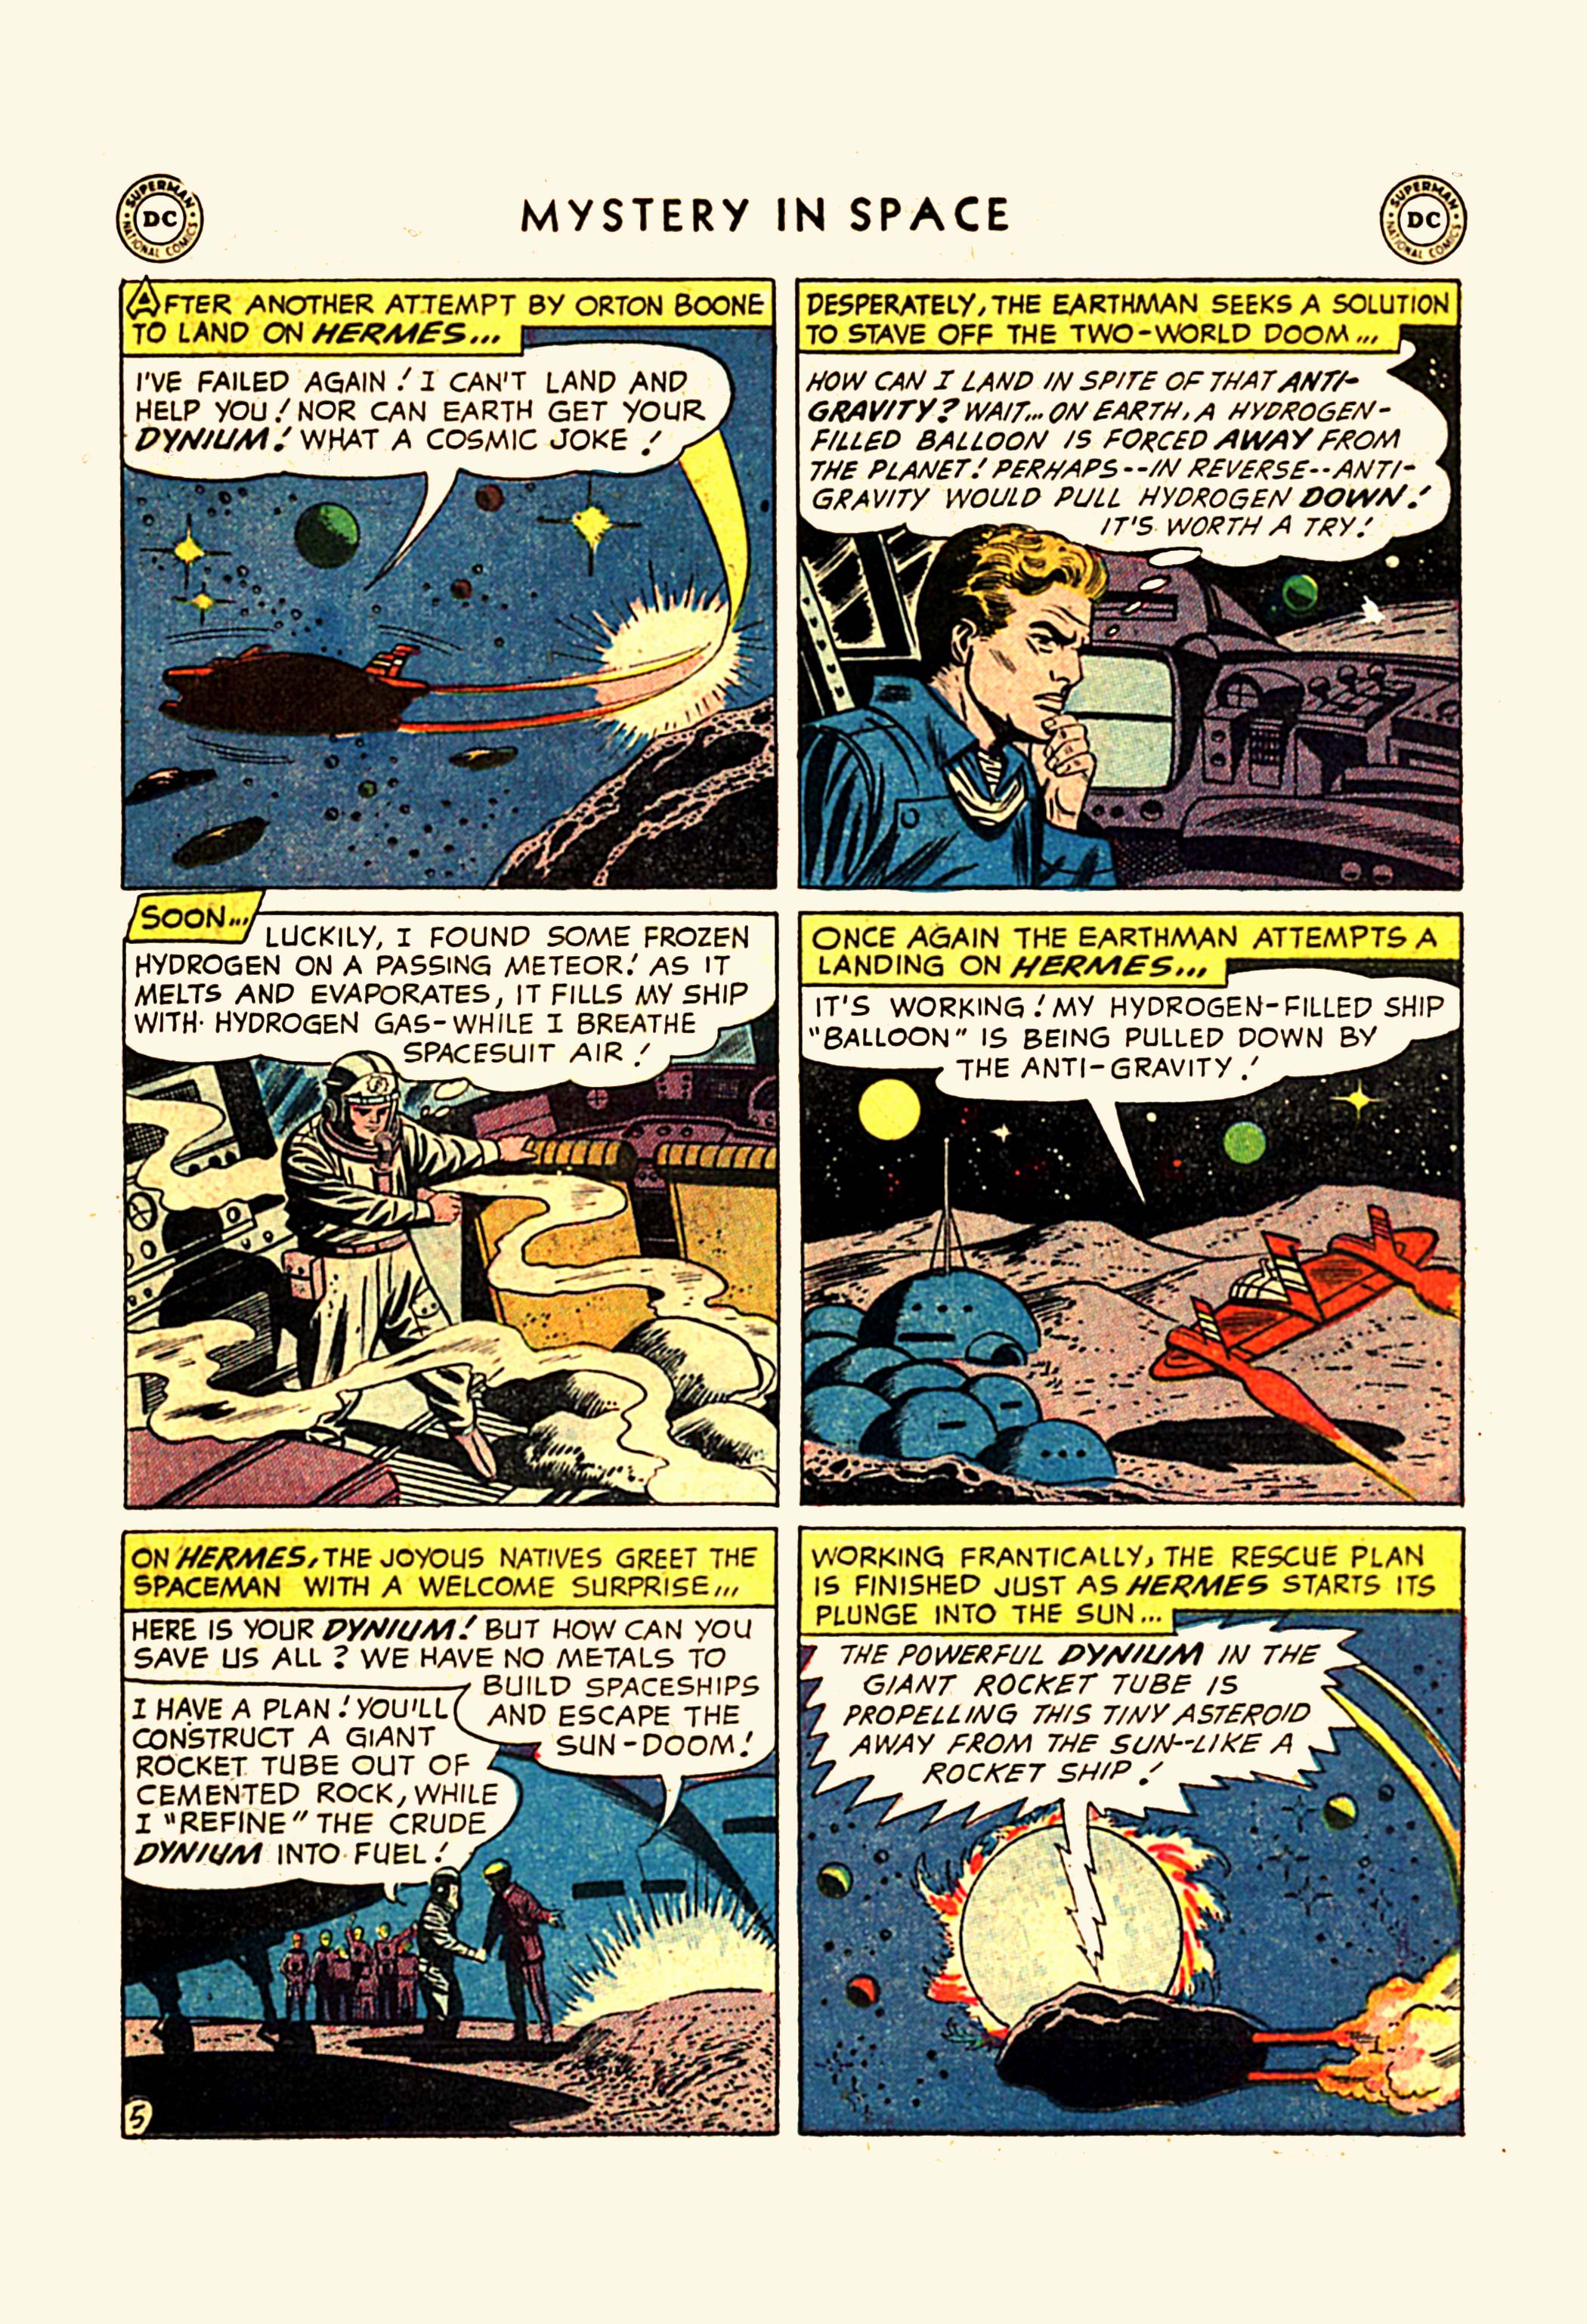 Mystery in Space (1951) 30 Page 14